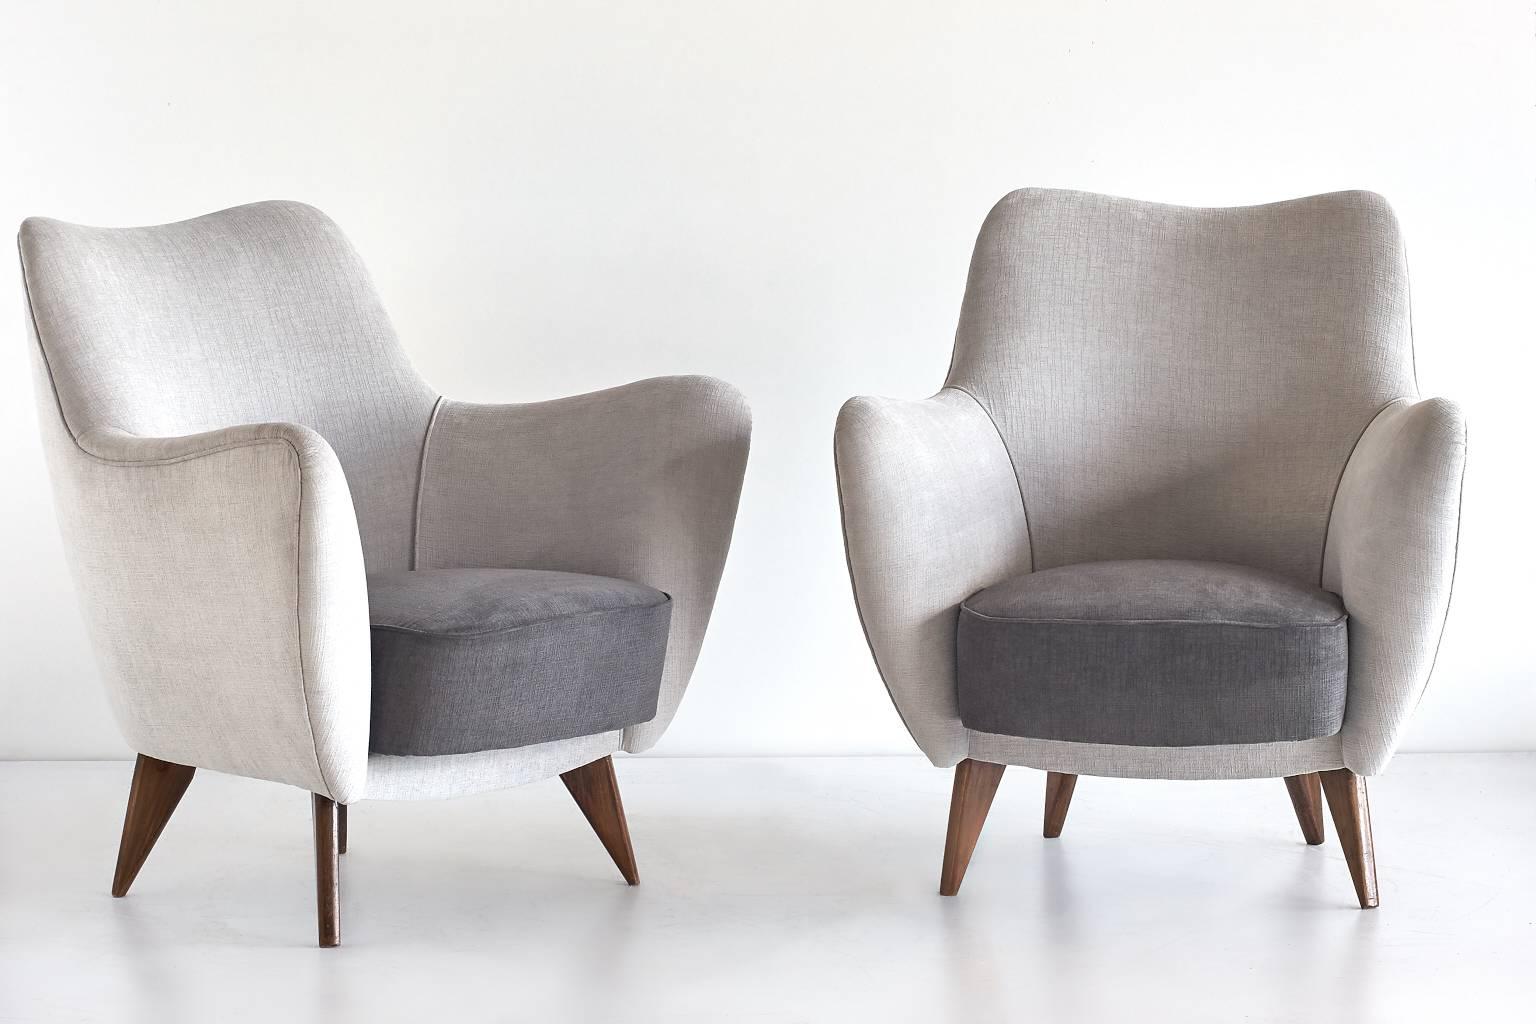 A pair of 'Perla' armchairs designed by Giulia Veronesi and produced by ISA Bergamo, Italy. Its sensual curves and the elegantly tapered legs give the chair a sculptural and modern feel. These sumptuous armchairs are upholstered in a bicolour velvet